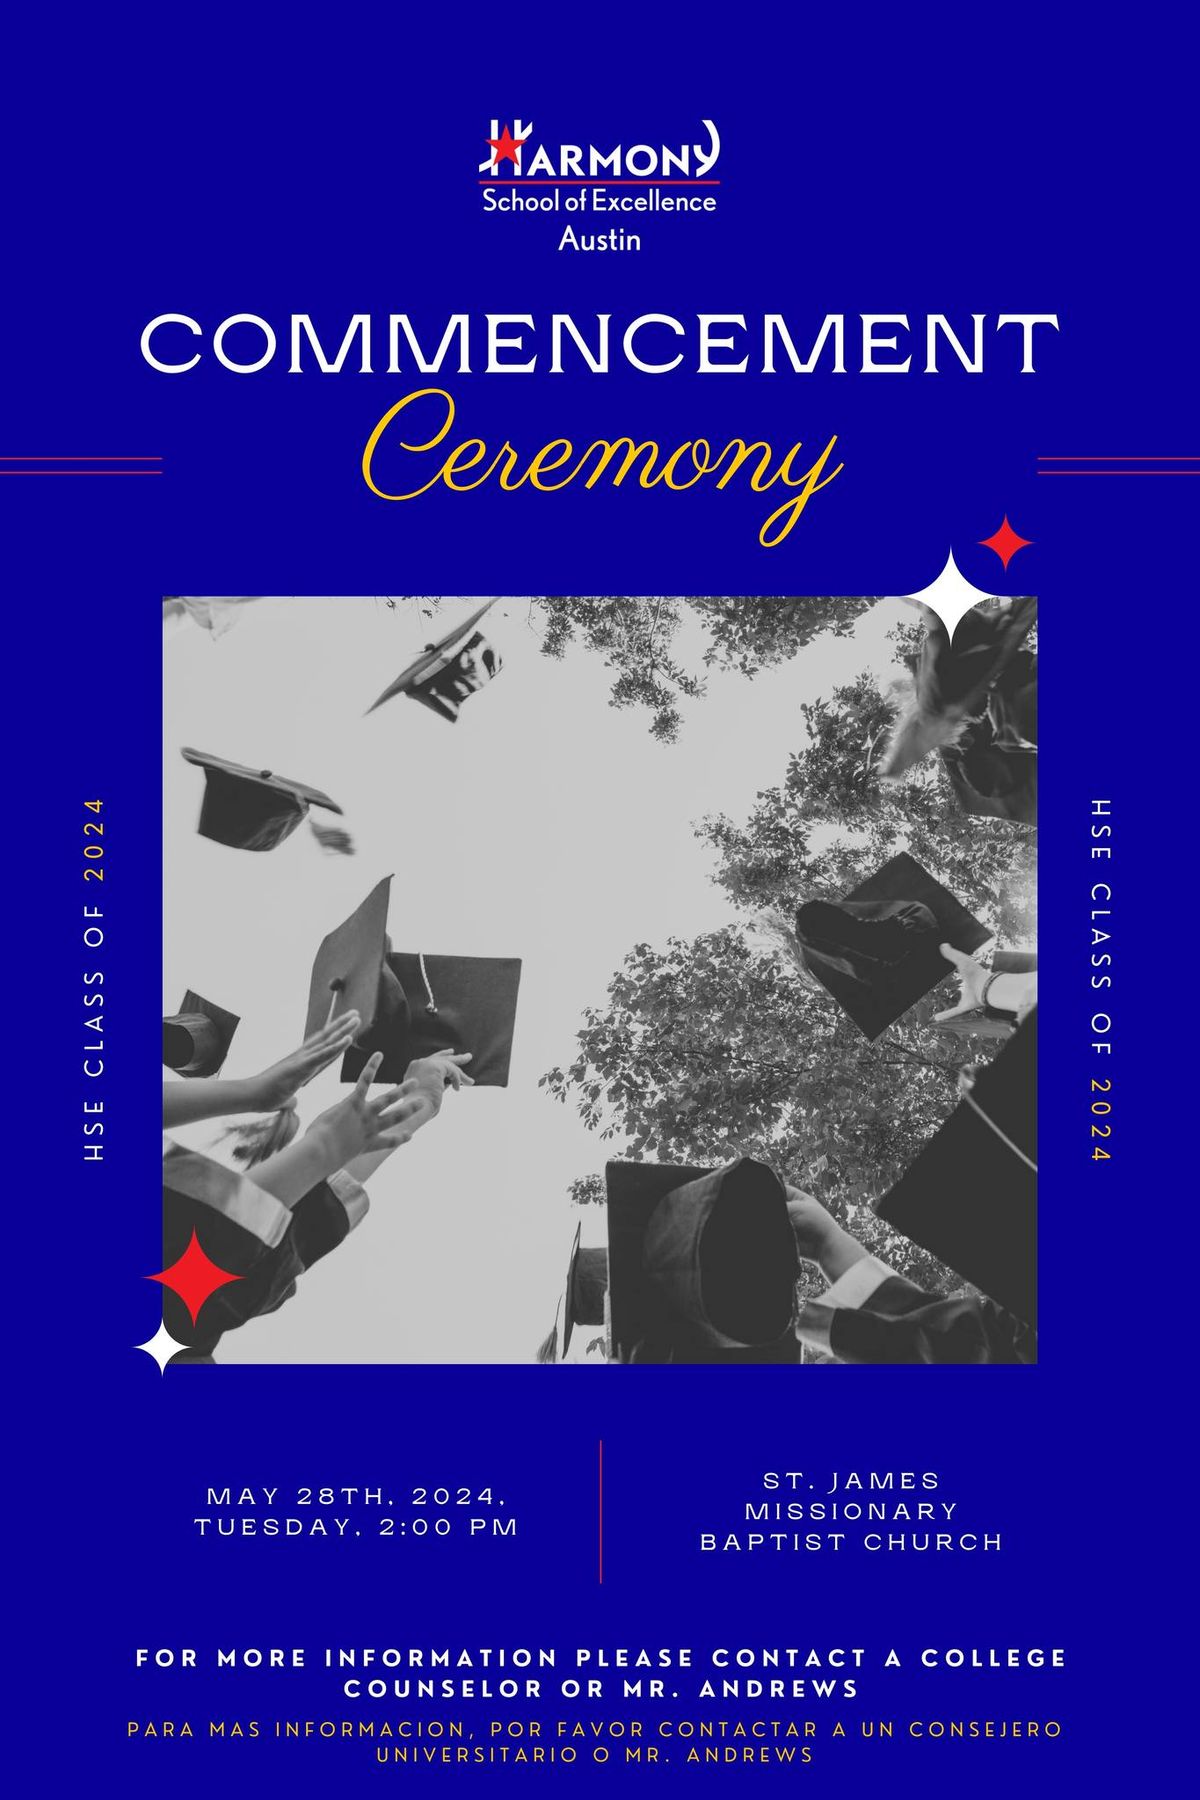 Harmony School of Excellence 2024 Commencement Ceremony 